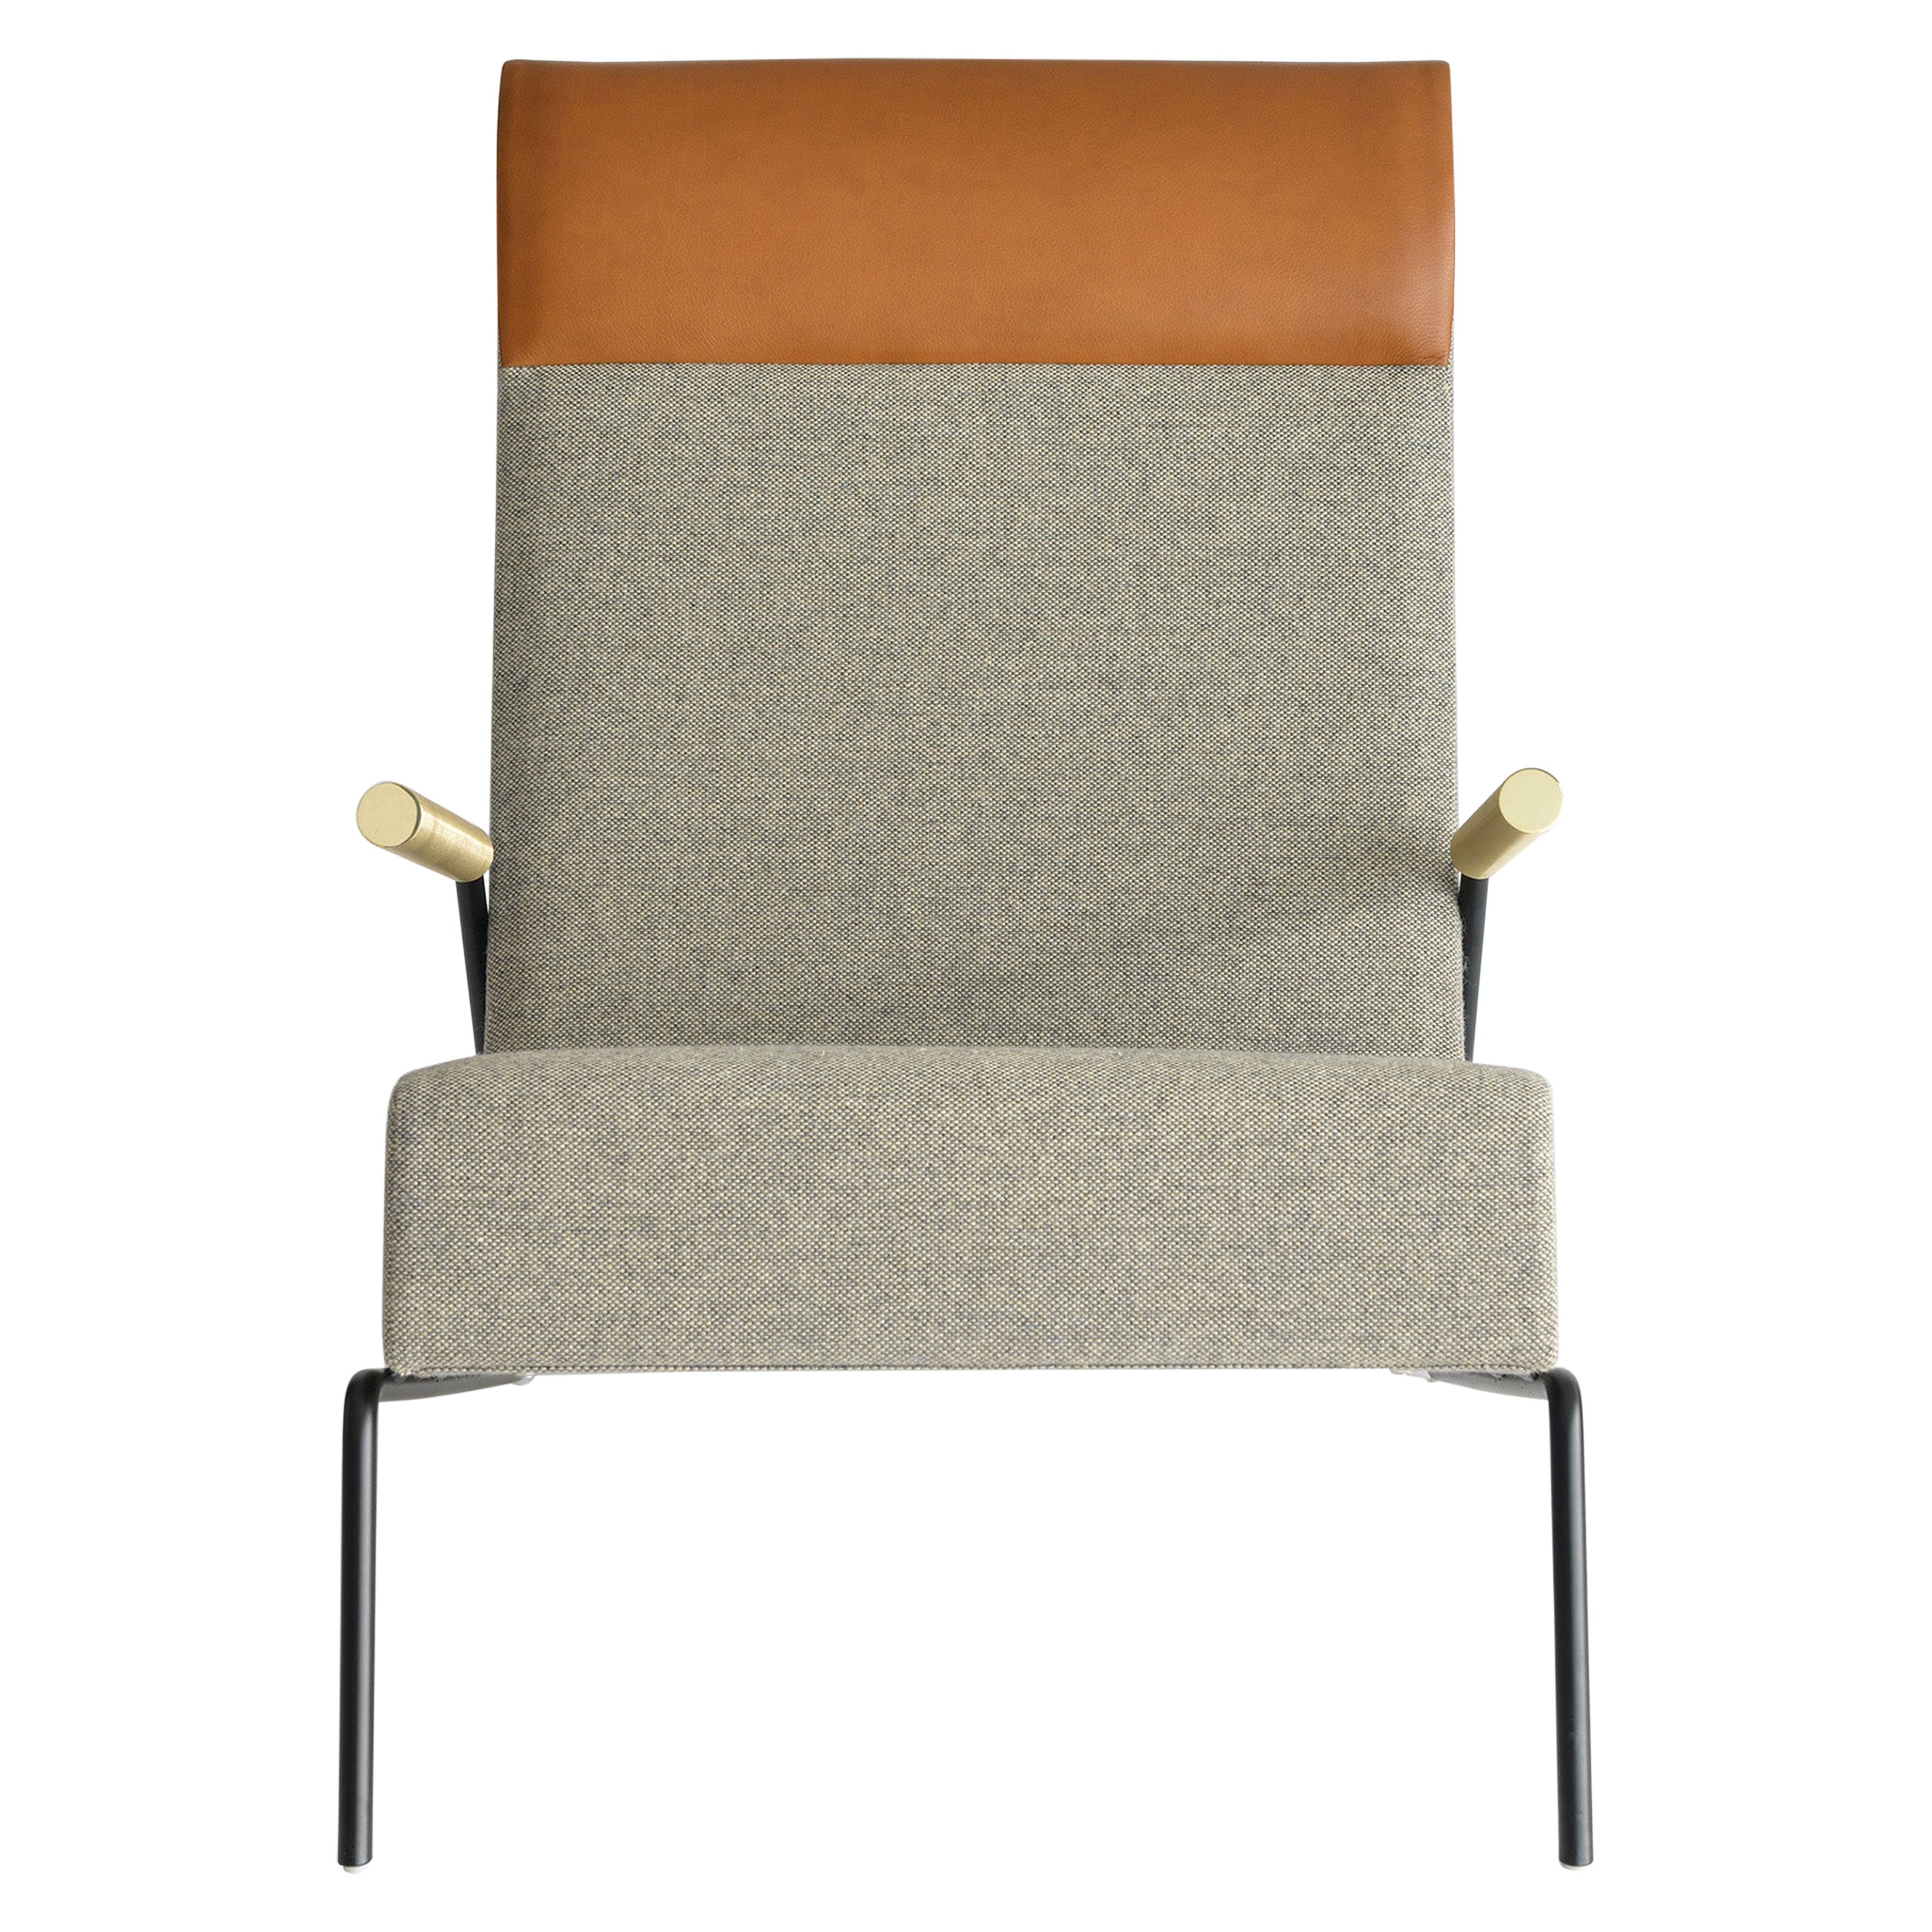 Kickstand Lounge Chair by Phase Design